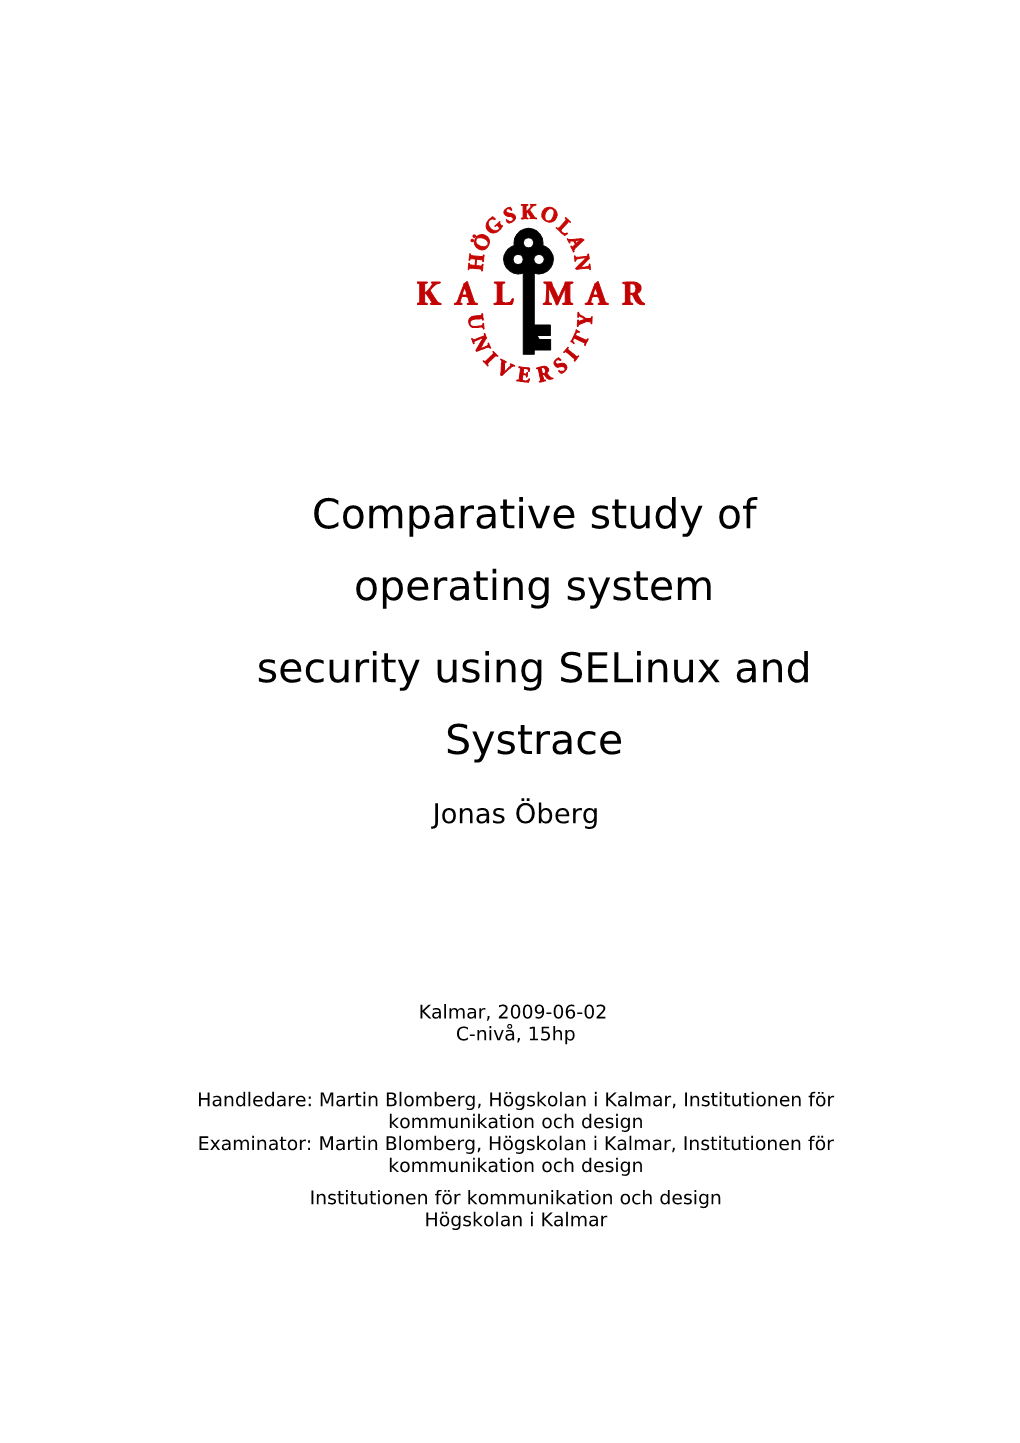 Comparative Study of Operating System Security Using Selinux and Systrace